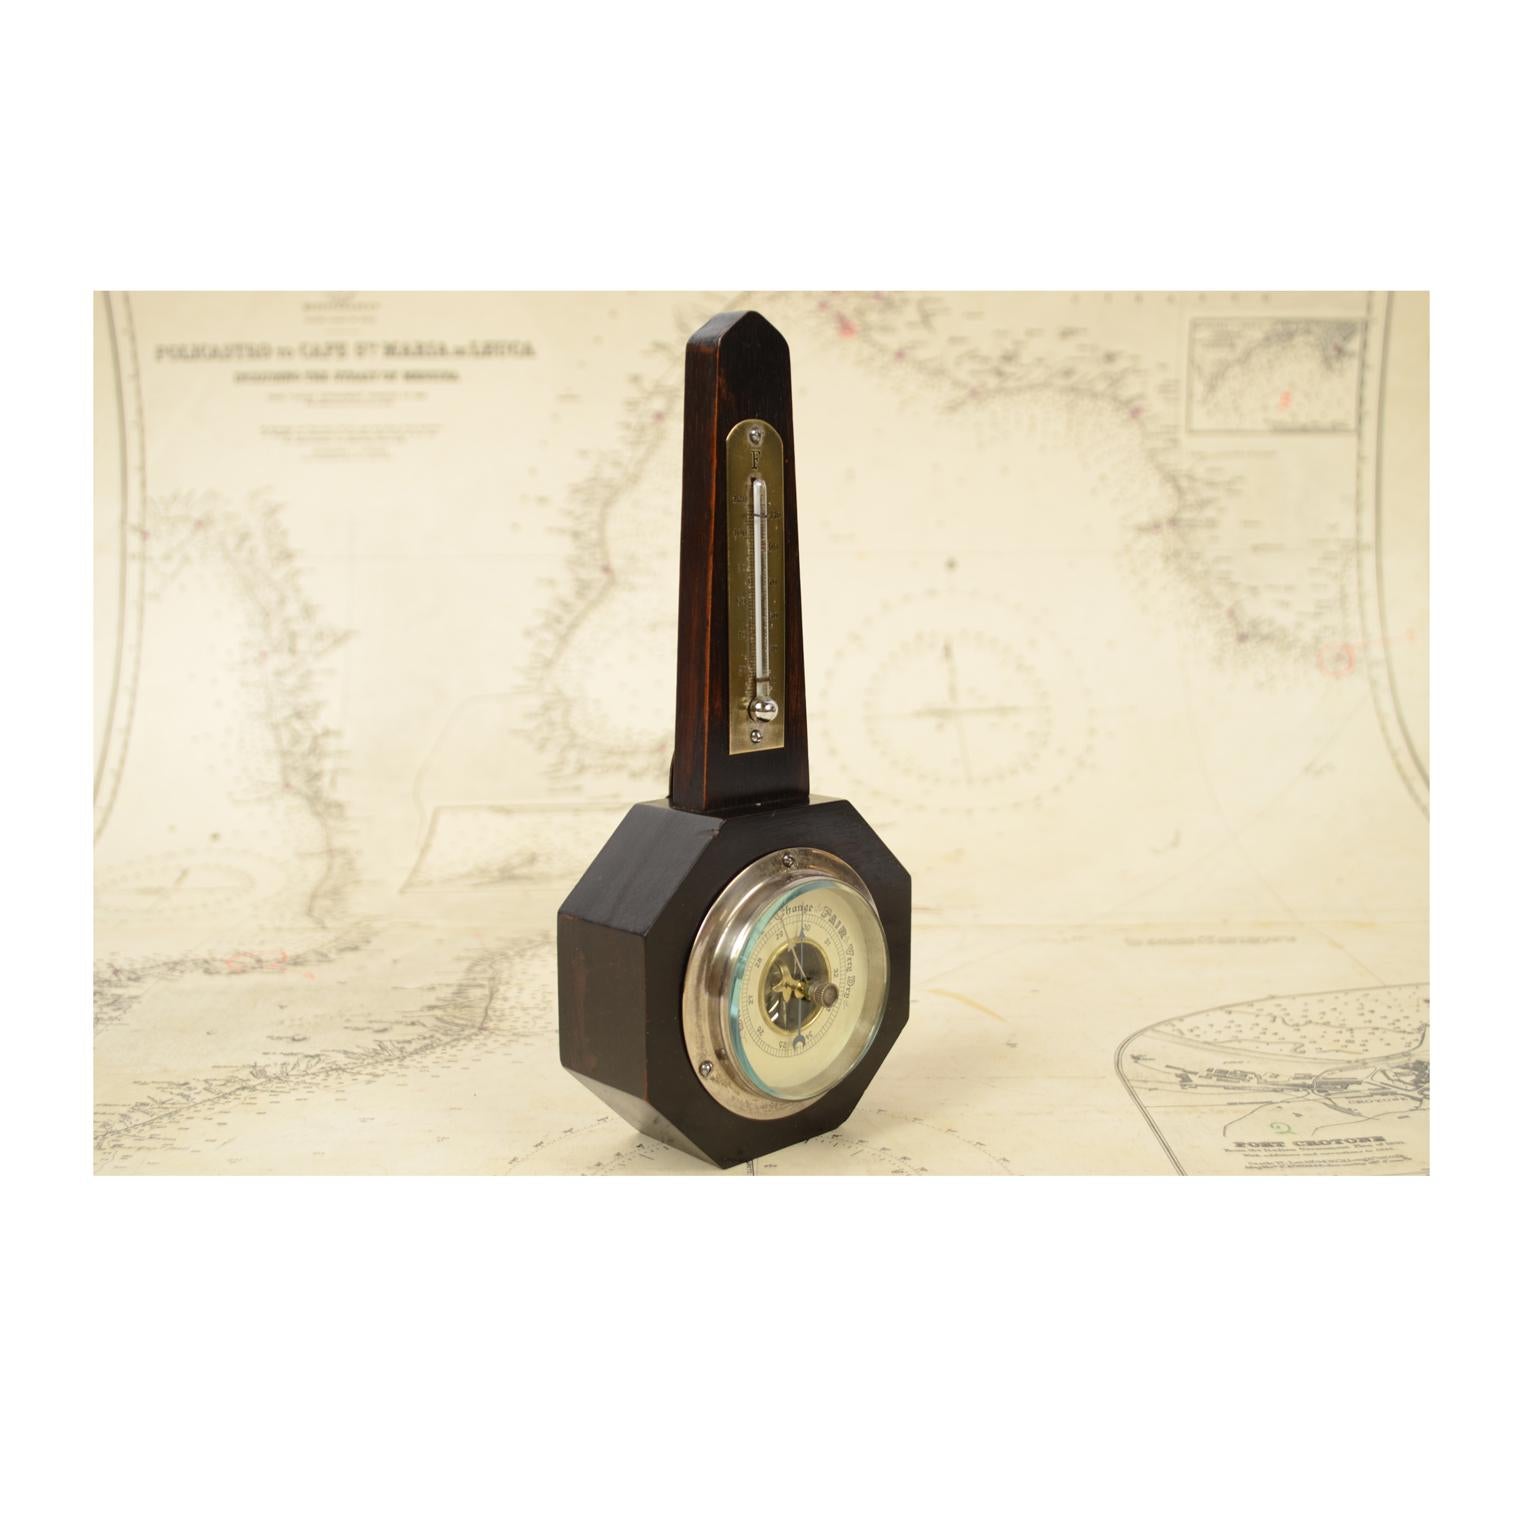 Aneroid barometer and thermometer with dual scale Remour and Fahrenheit, mounted on a wooden base in the shape of an obelisk. English manufacture of the early 1900s. Very good condition, fully functional. Measures: Height 20 cm.
Shipping in insured